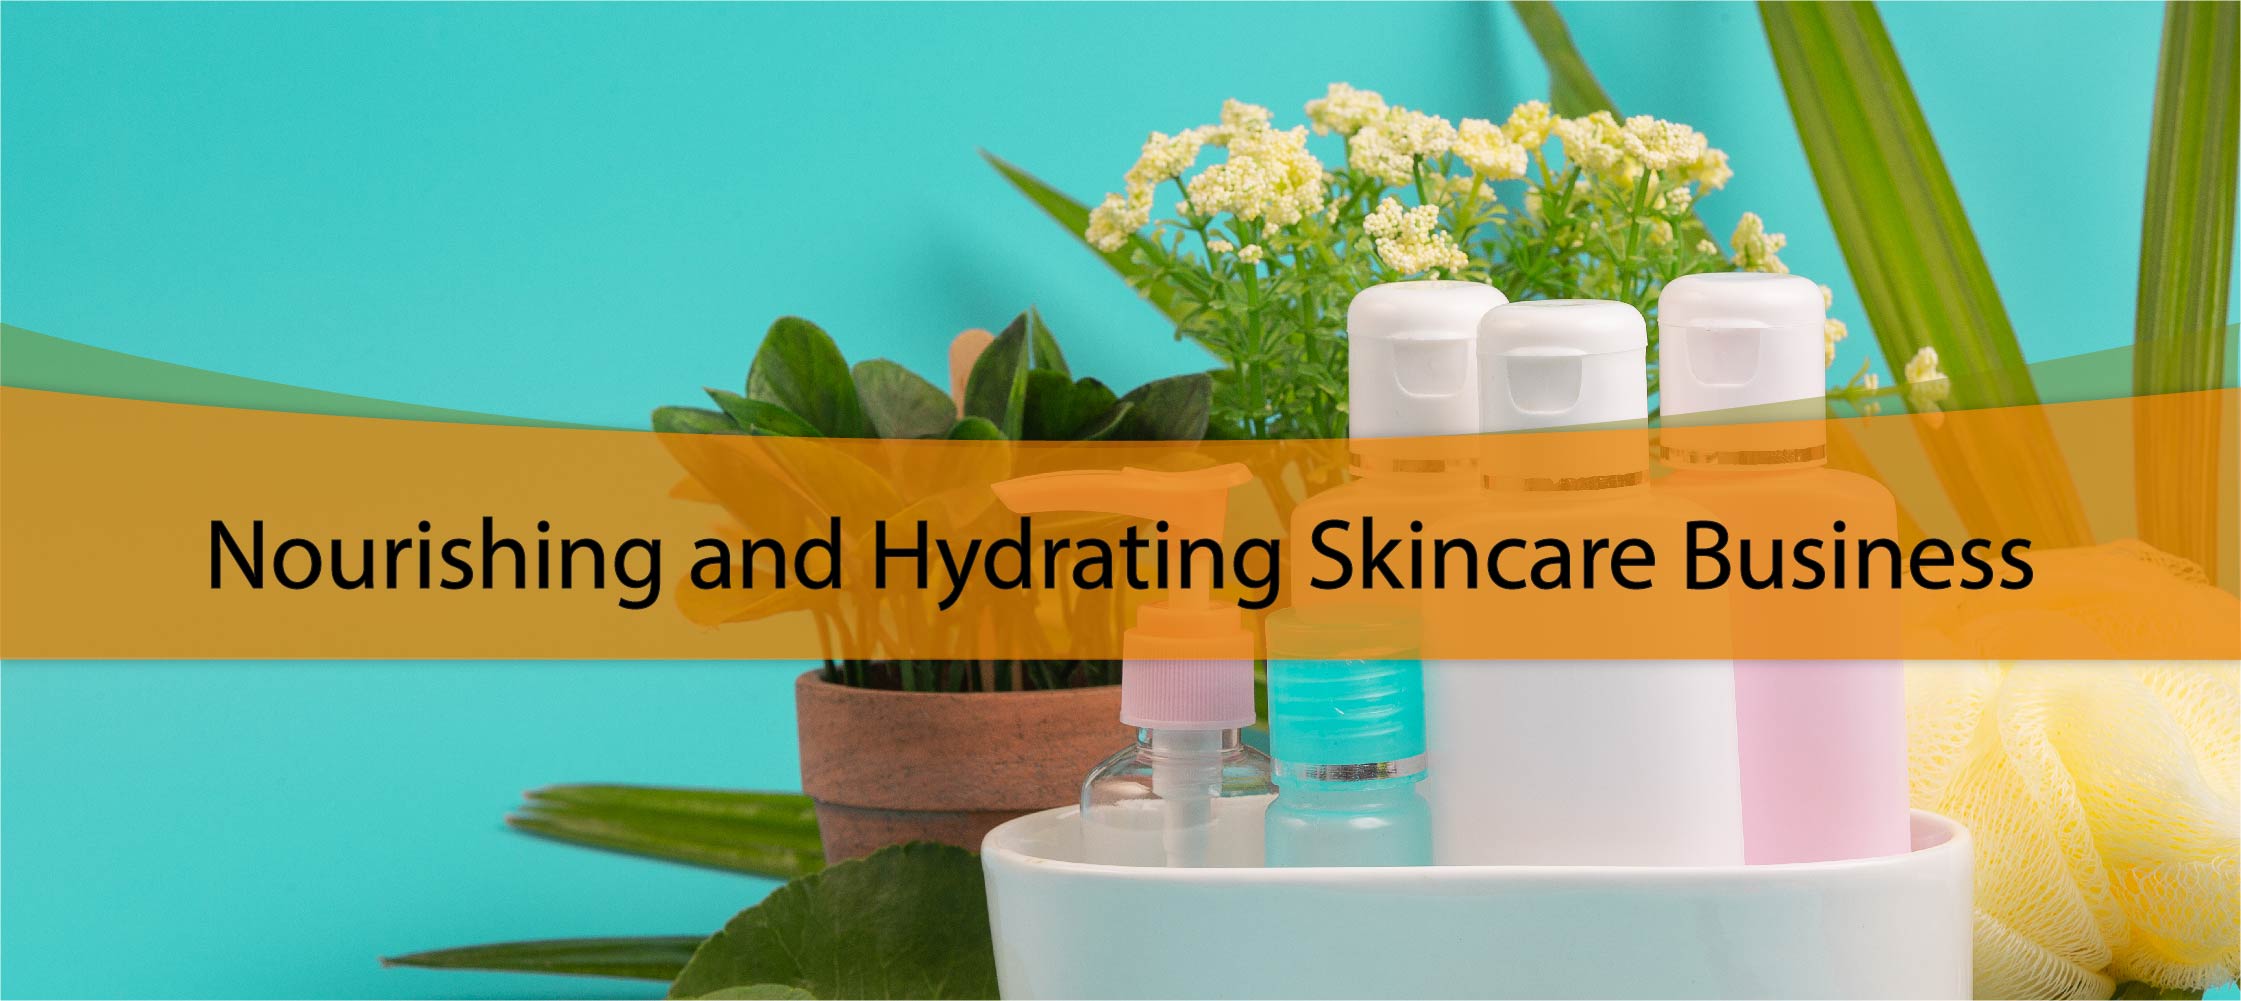 Nourishing and Hydrating Skincare Business